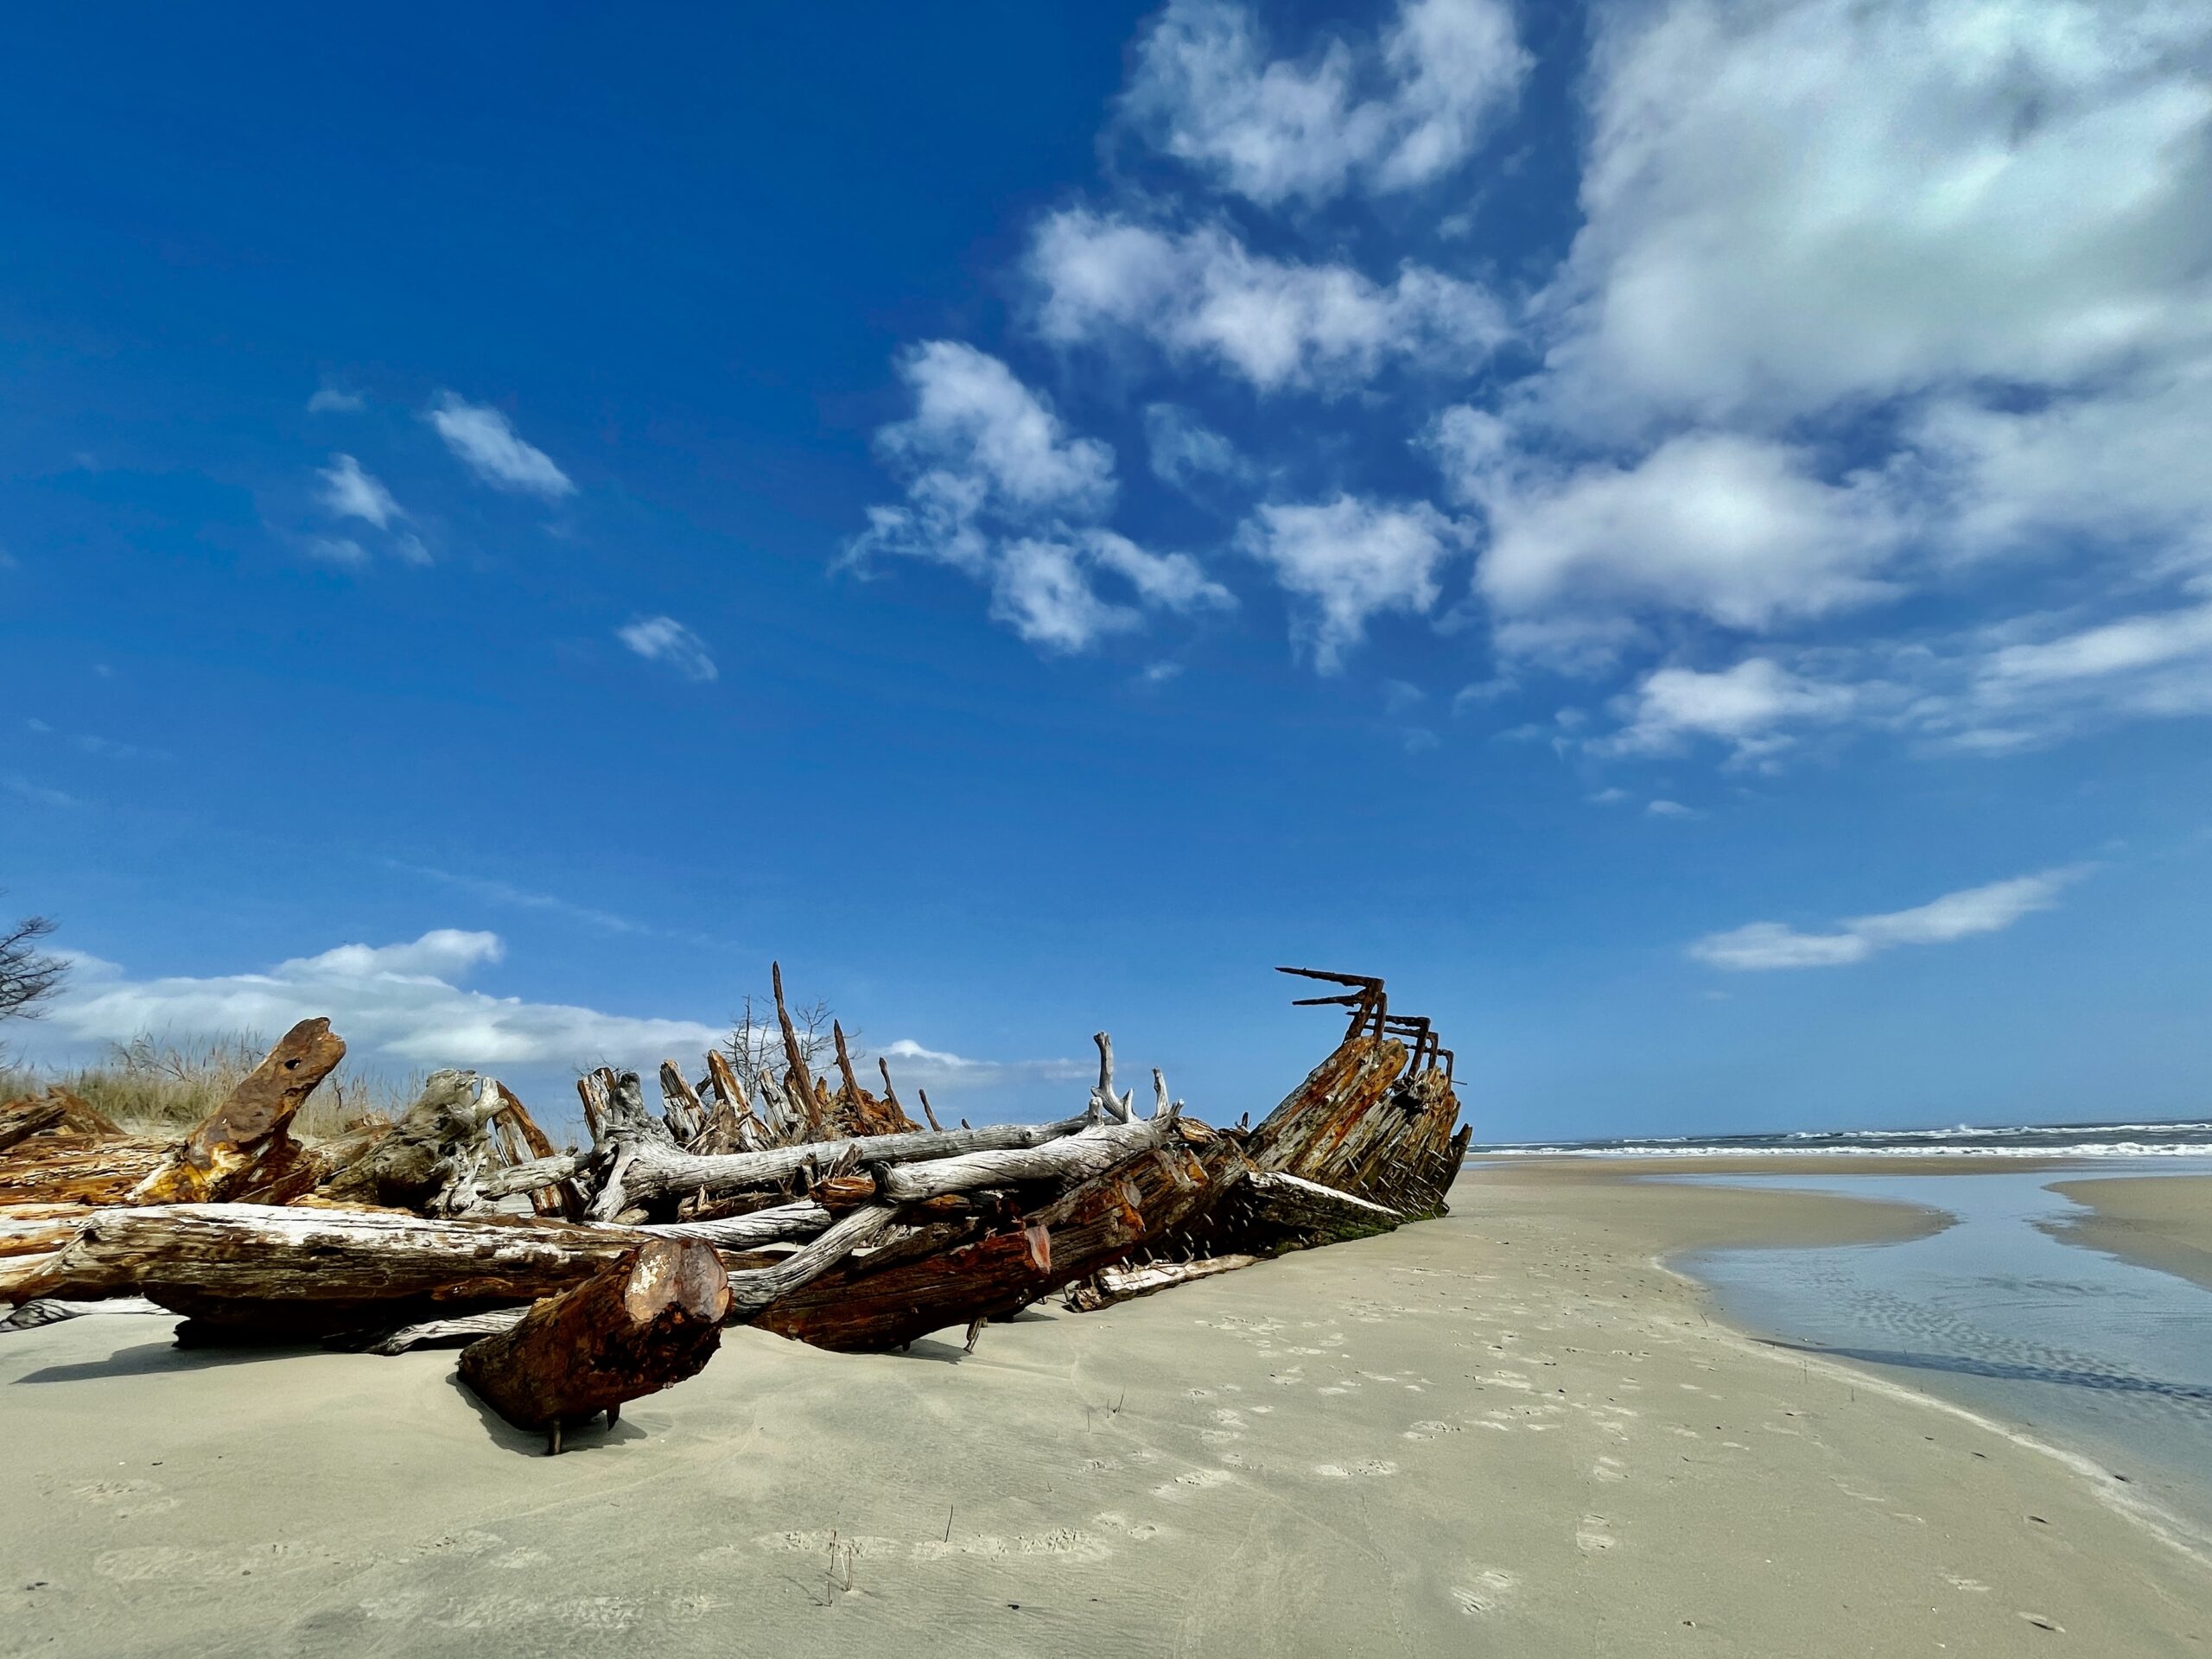 Remains of the Esk stand sentinel on Parramore Island on Virginia’s Eastern Shore.